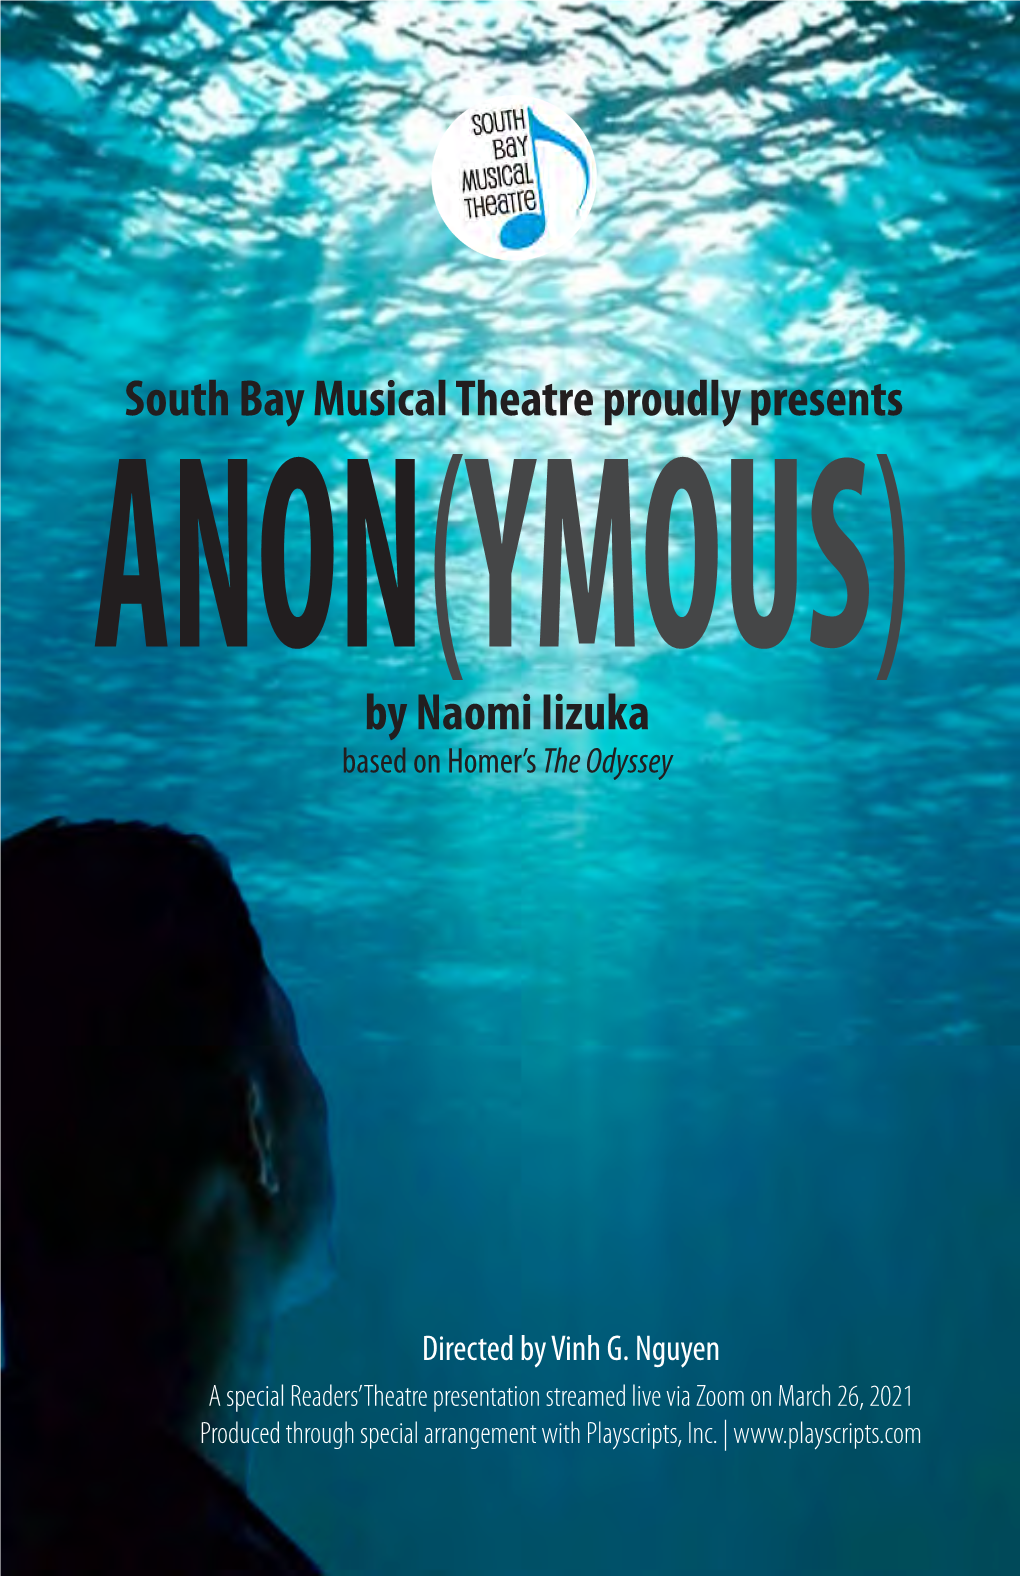 South Bay Musical Theatre Proudly Presents by Naomi Iizuka